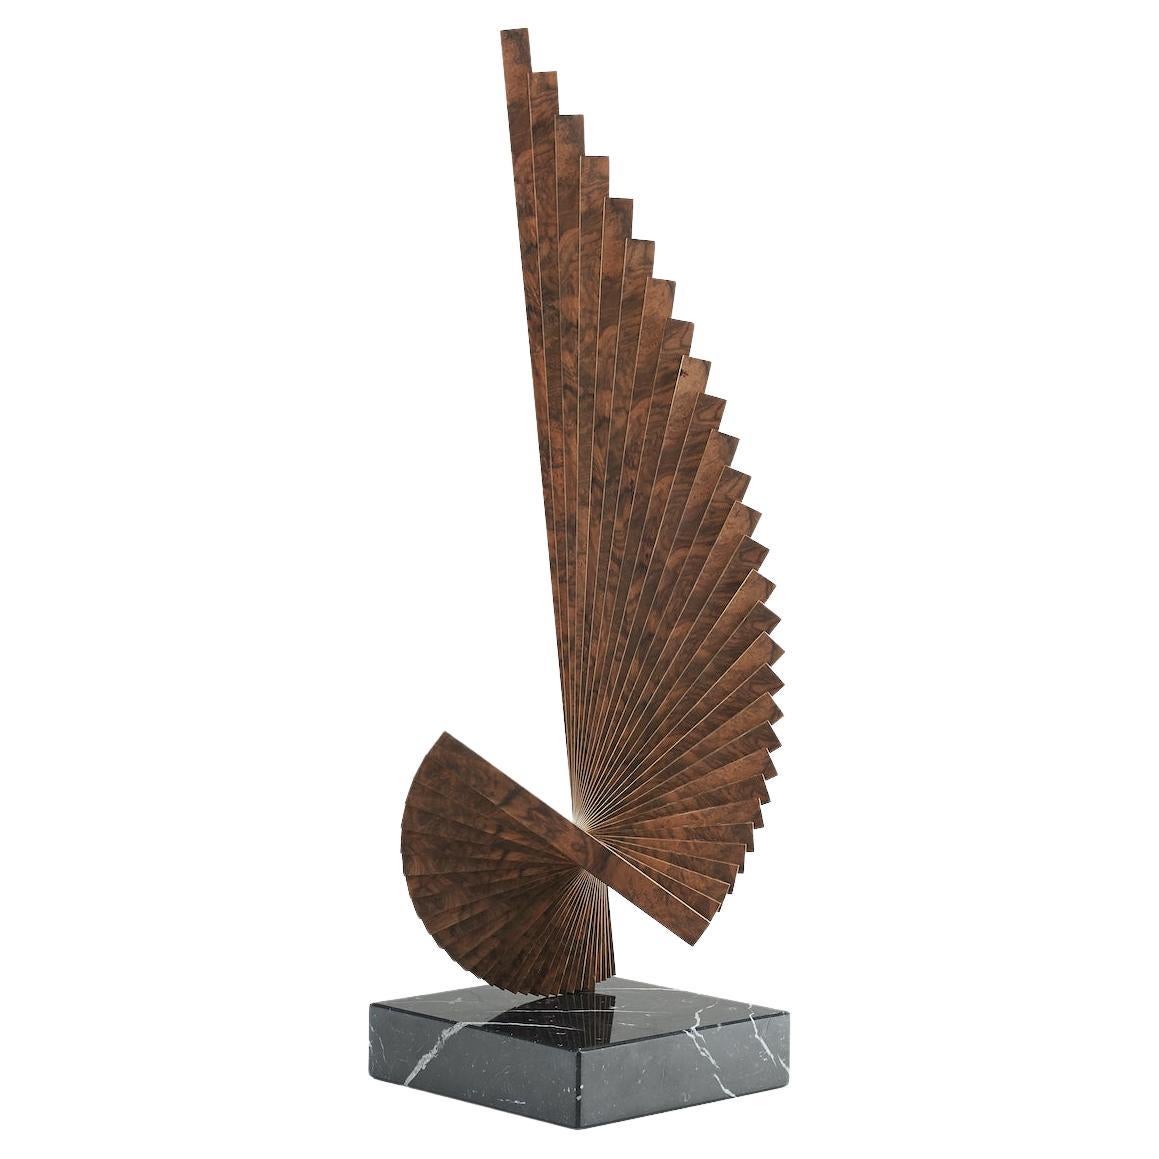 Tabletop sculpture constructed from flitches of book-matched walnut and brass For Sale